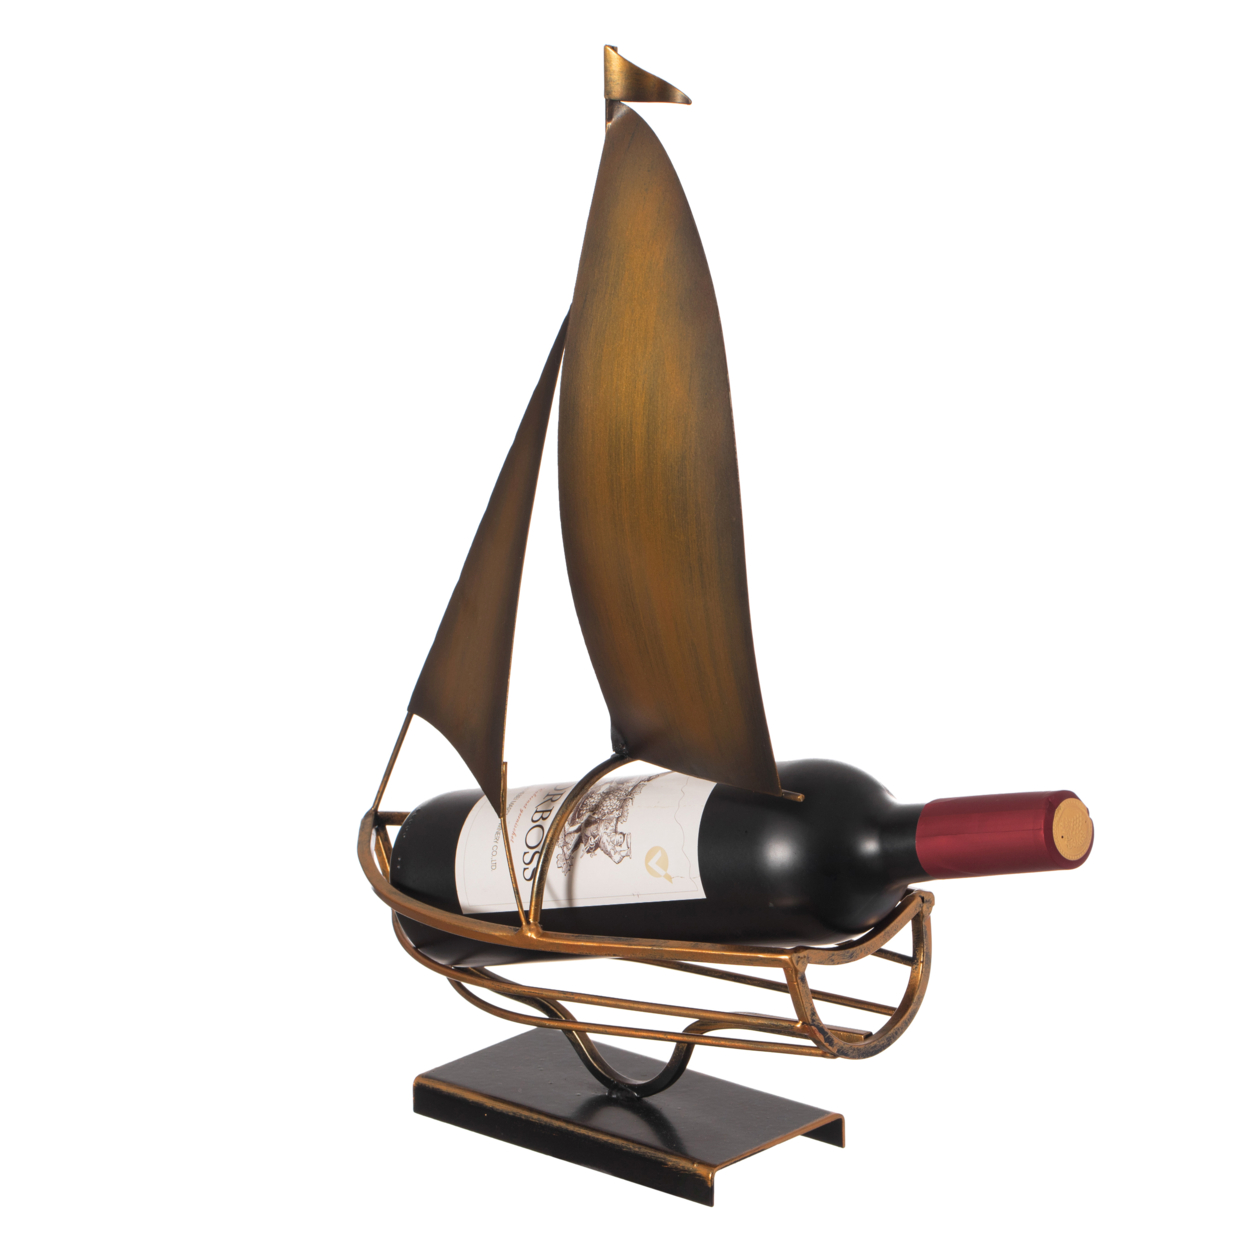 Decorative Bronze Metal Vintage Single Bottle Abstract Boat Wine Holder For Tabletop Or Countertop